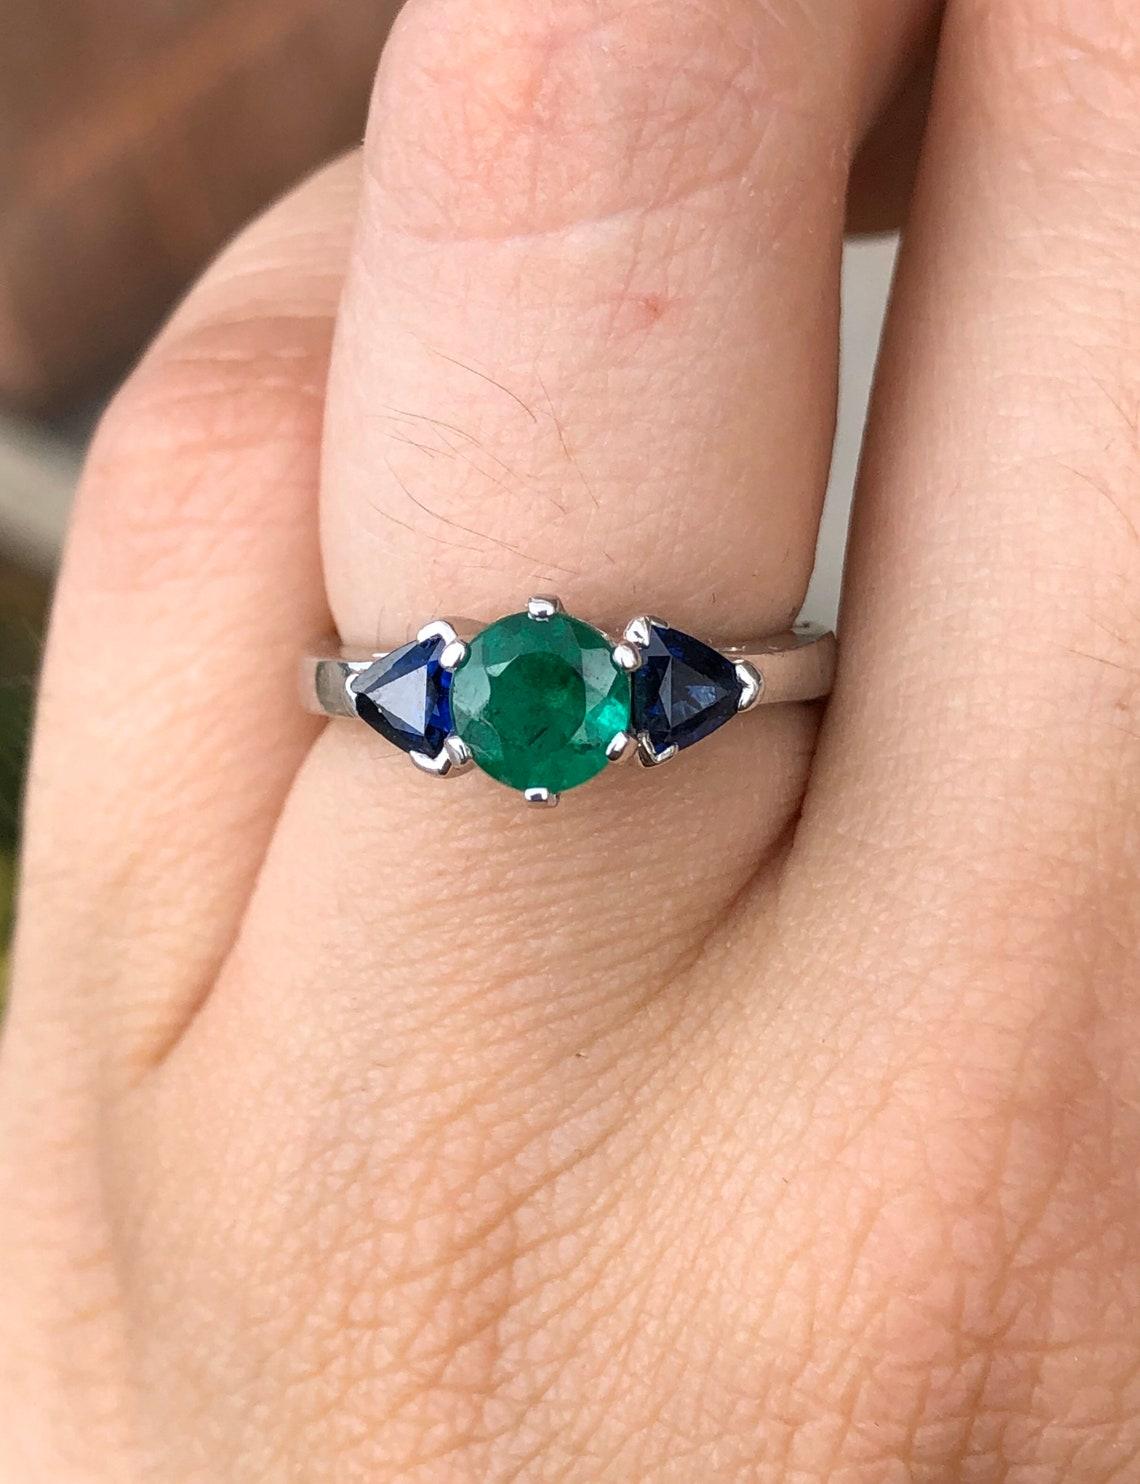 emerald stone and blue sapphire together